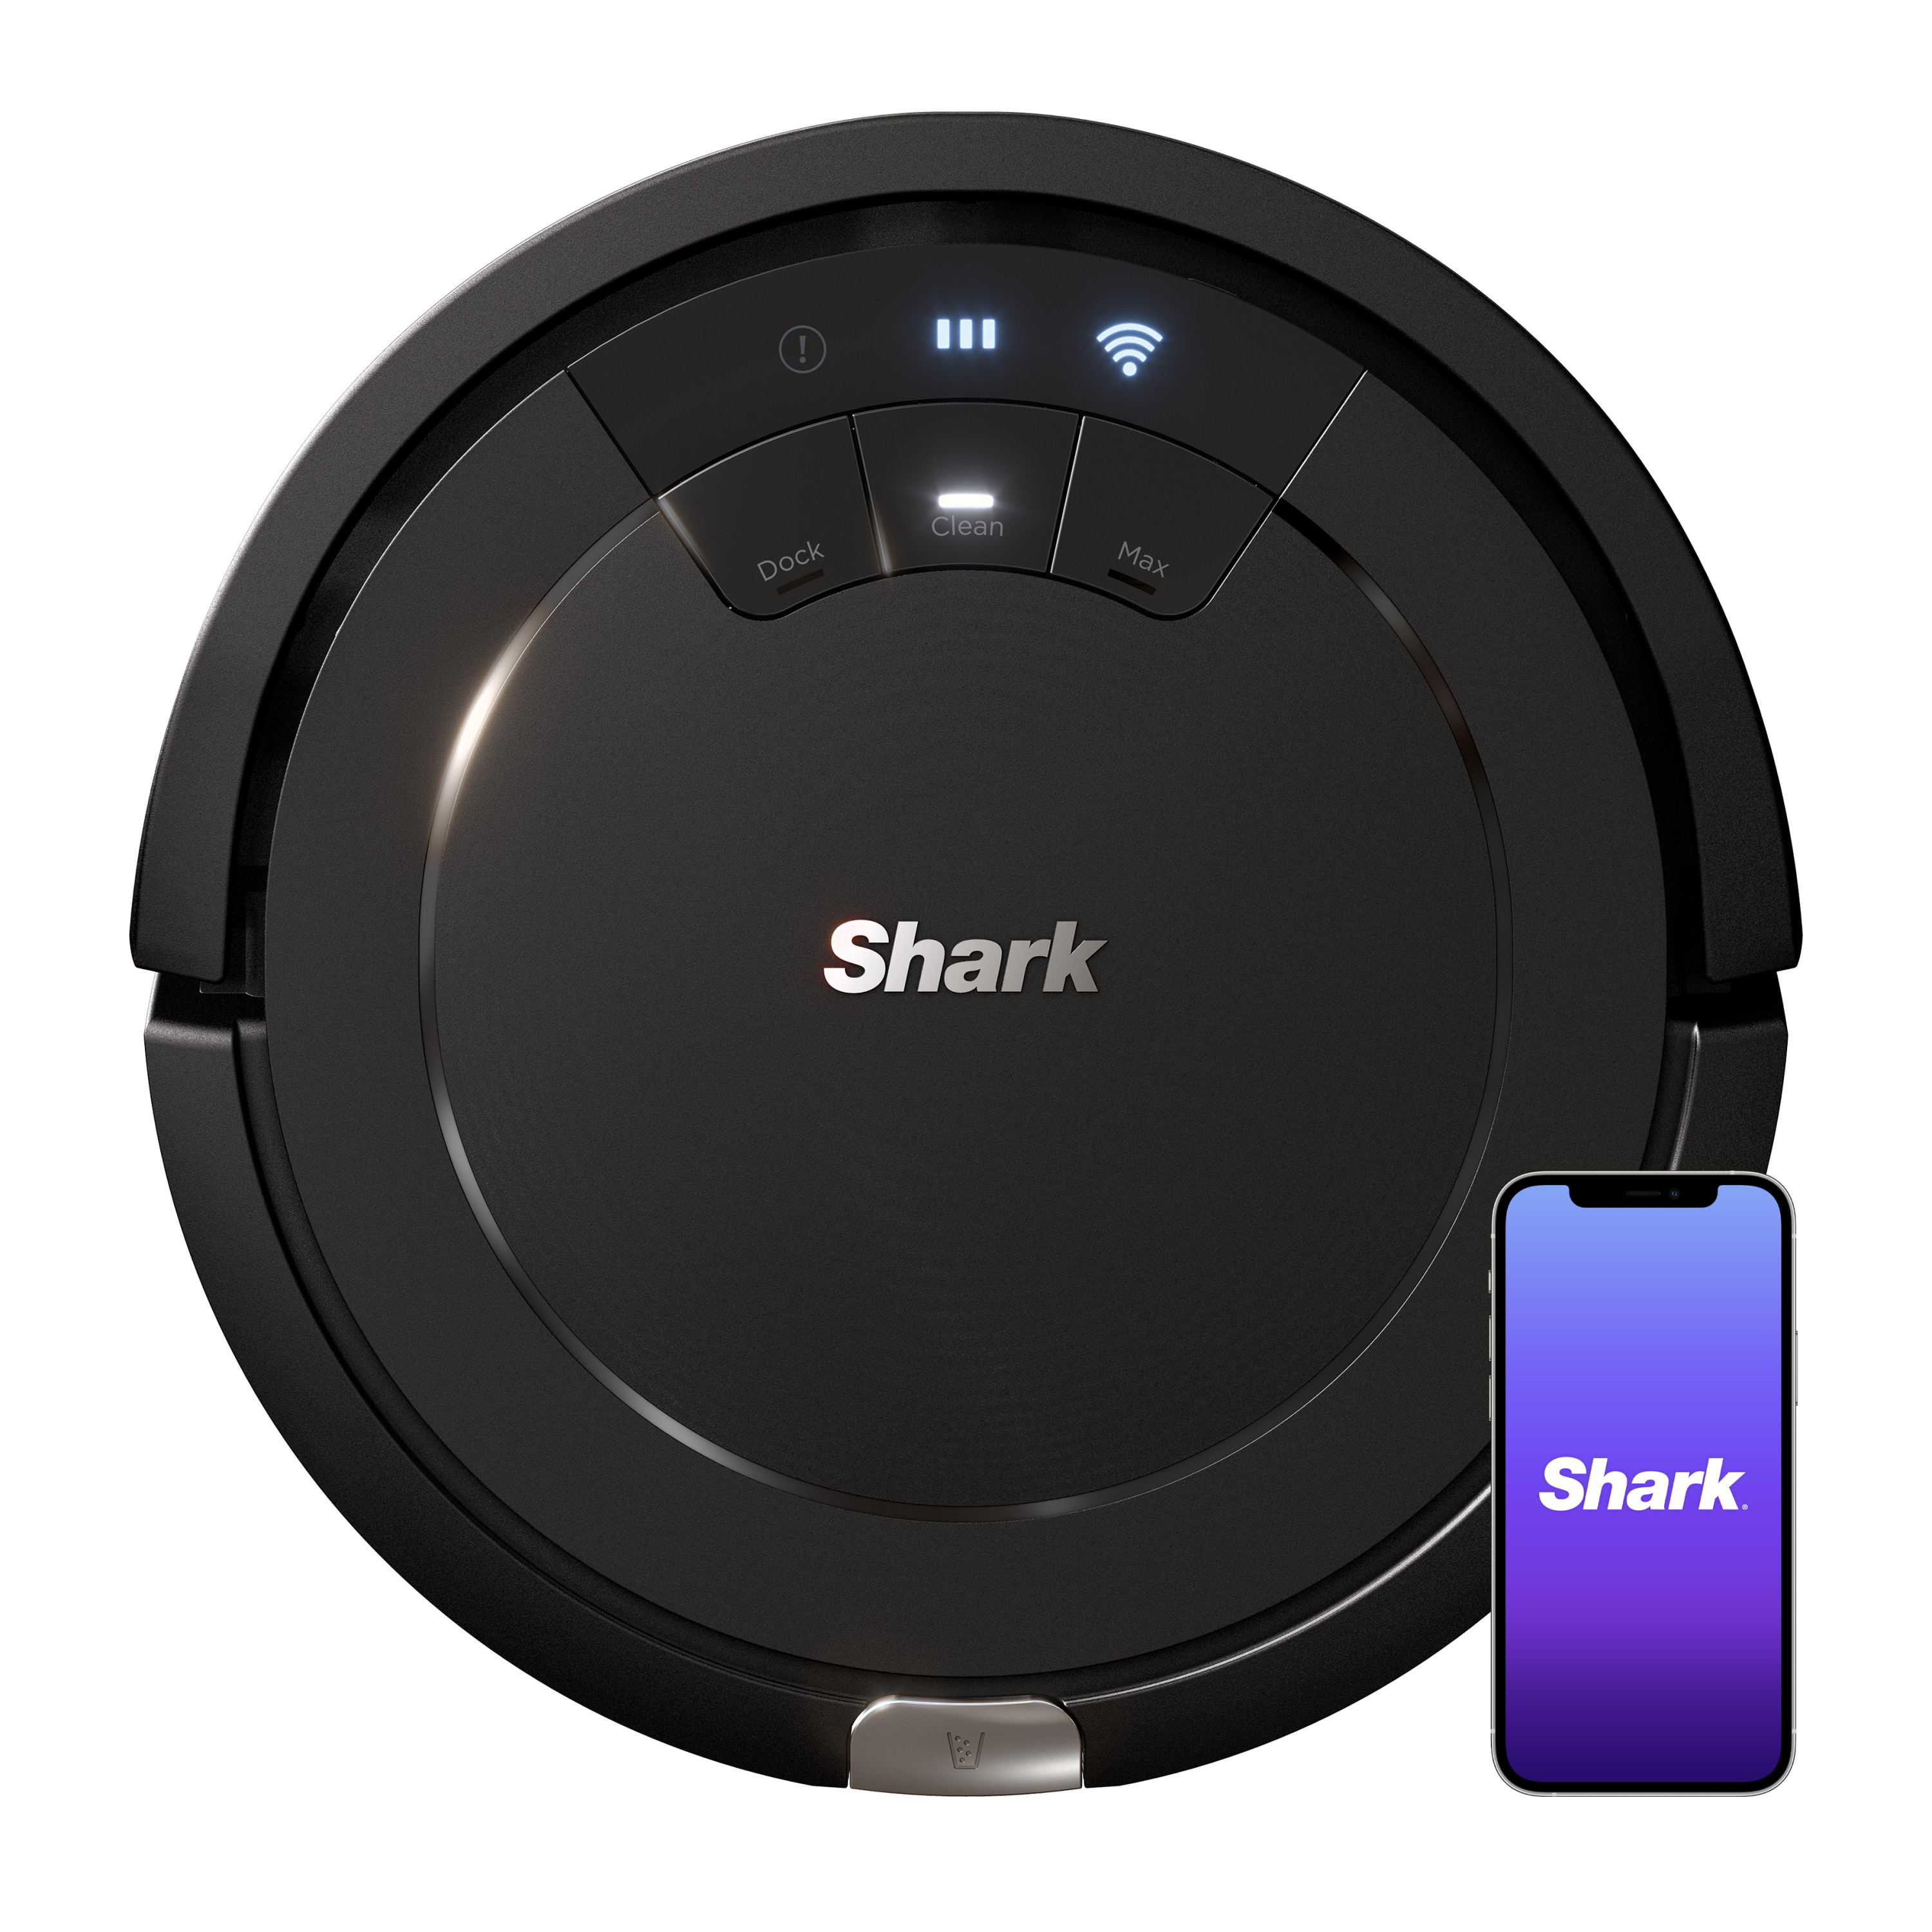 Shark ION Robot Vacuum, Wi-Fi Connected, Black, RV754 - image 1 of 11